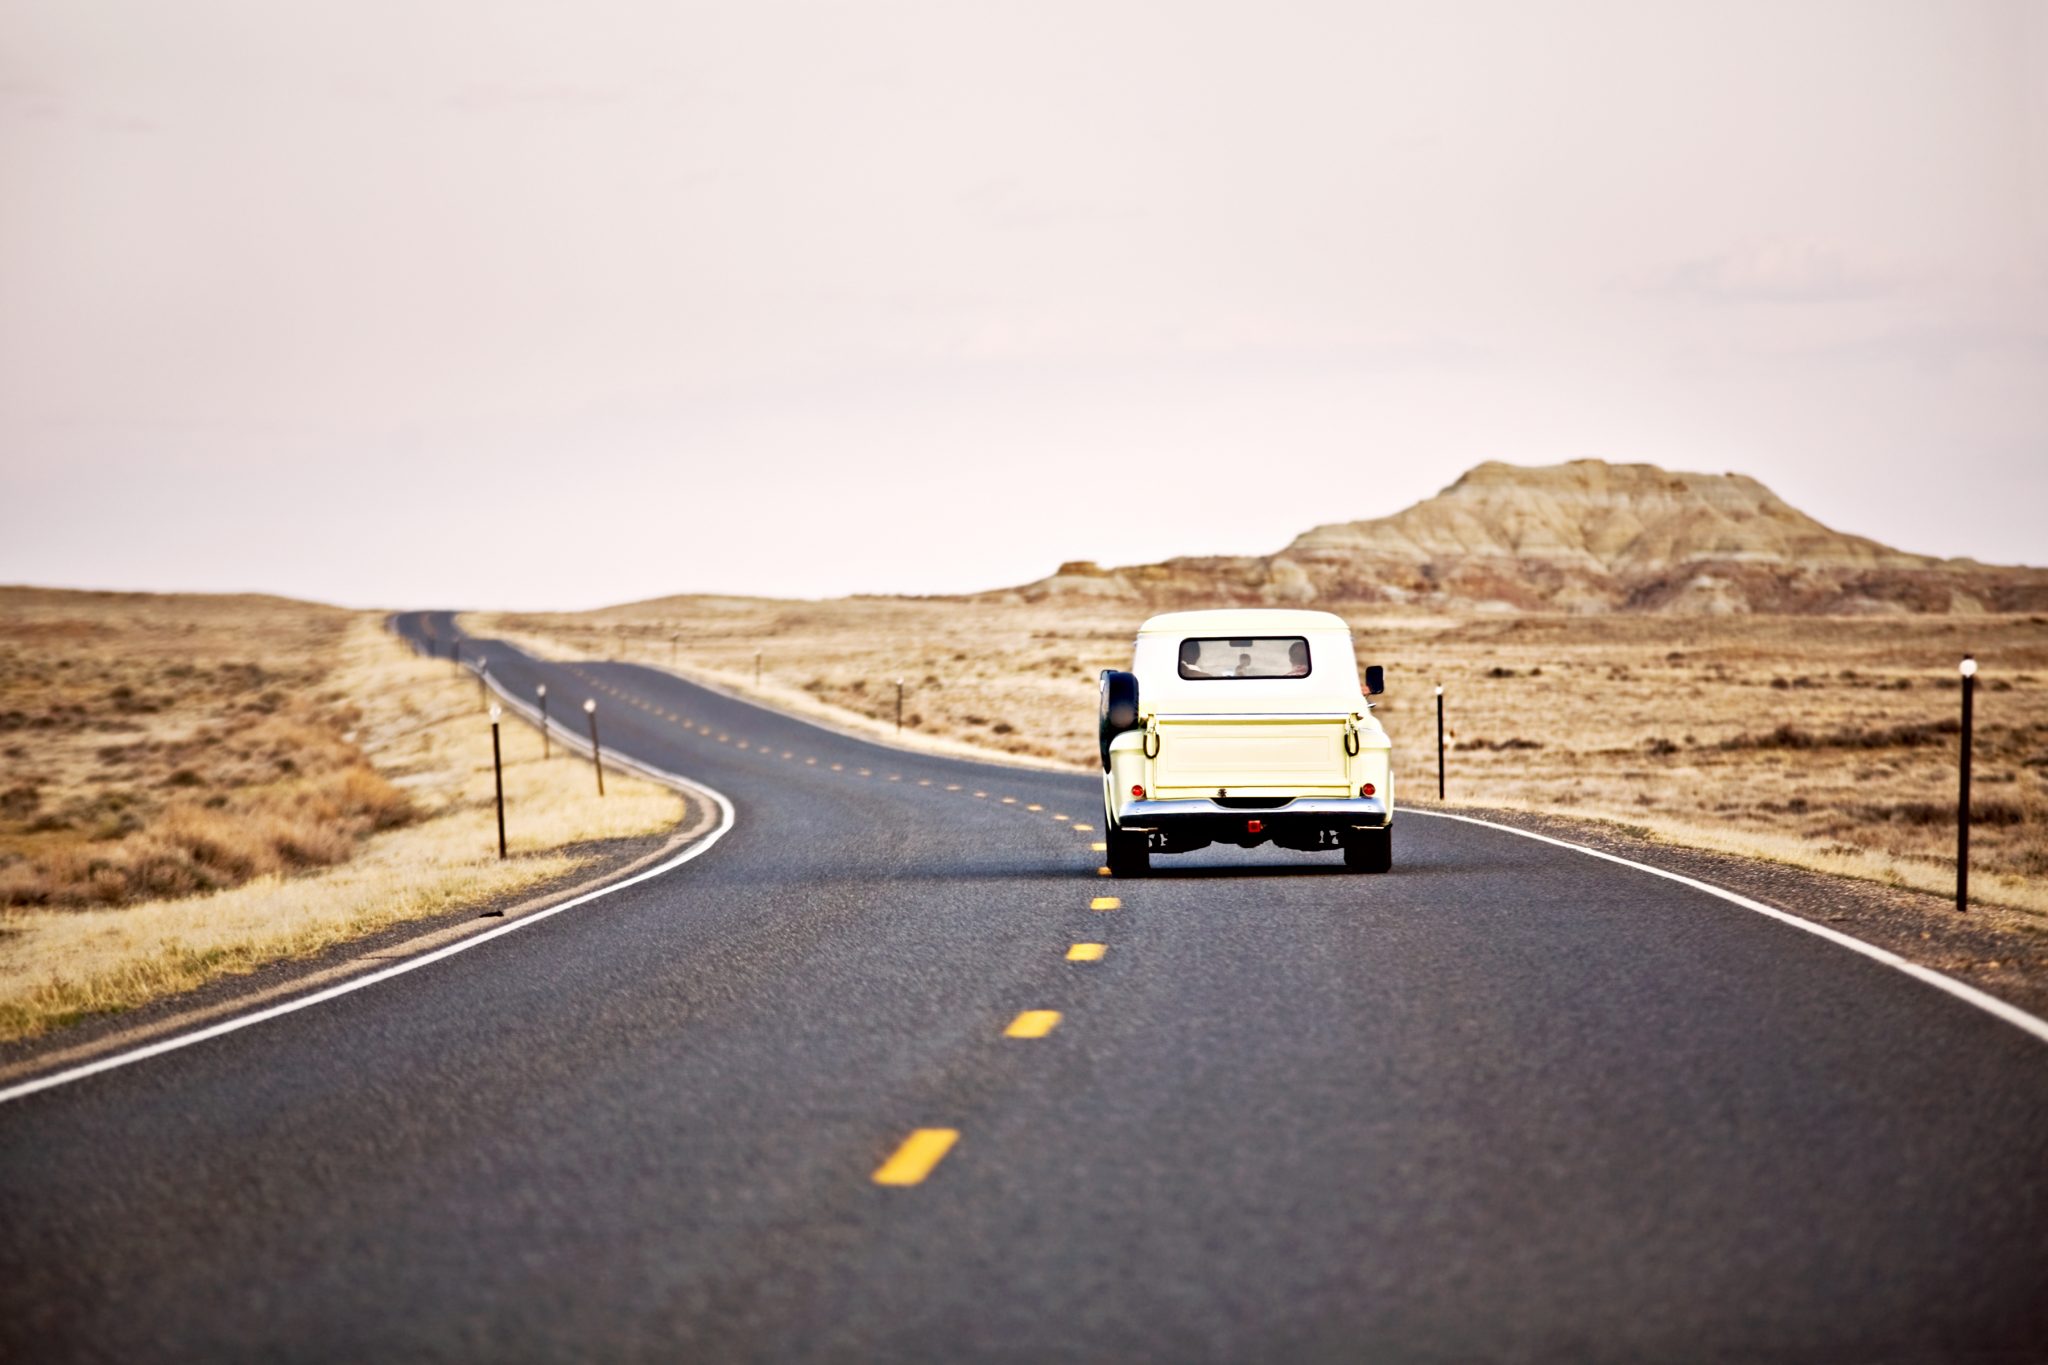 Got A Road Trip Coming Up? Rent A Car Instead of Taking Your Own